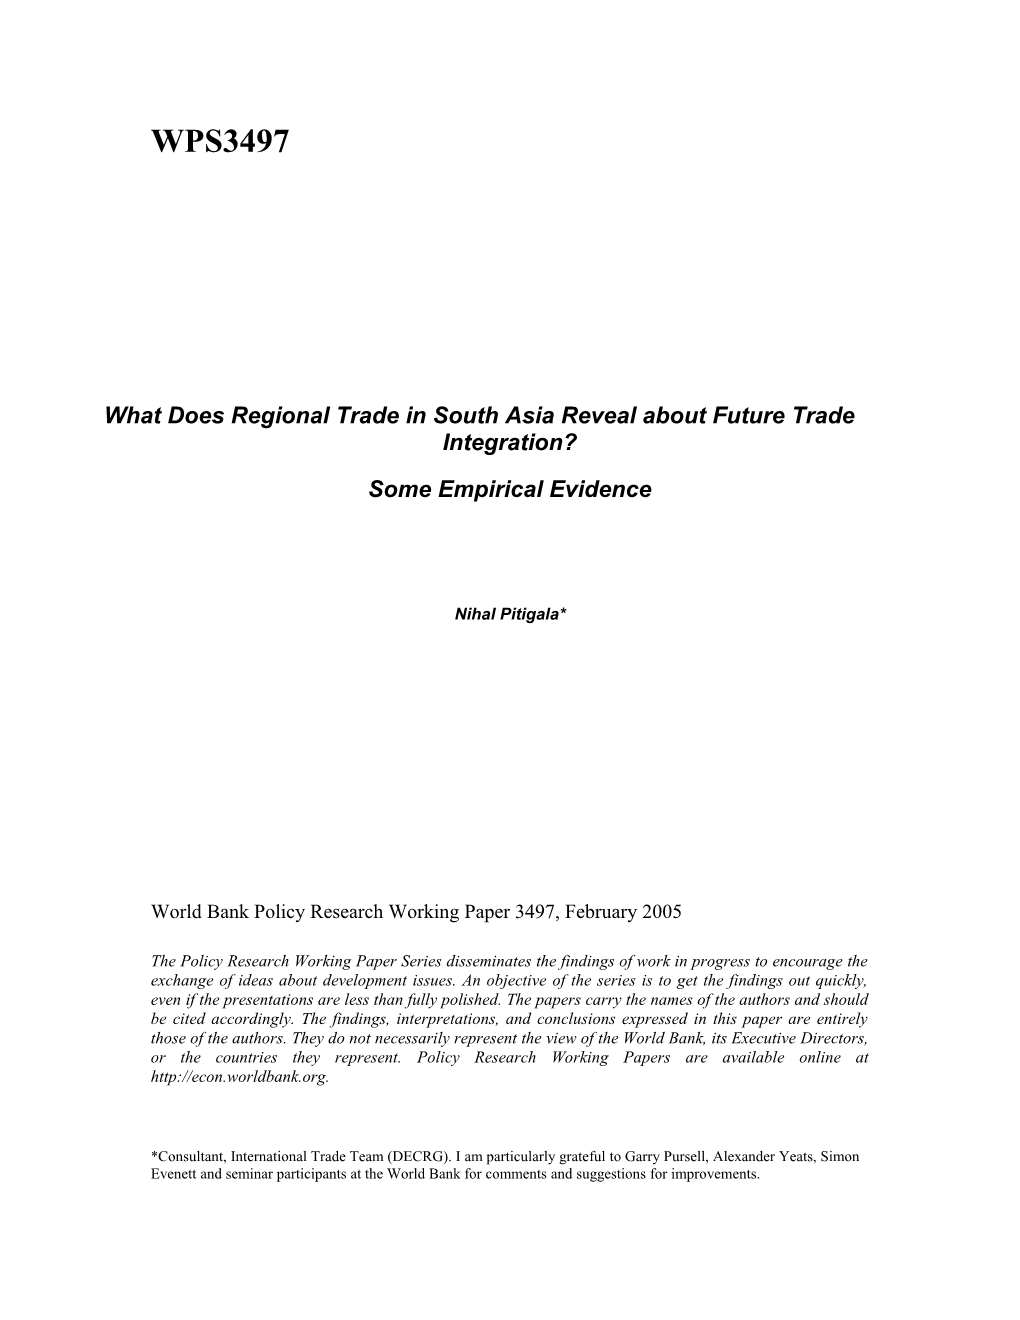 What Does Regional Trade in South Asia Reveal About Future Trade Integration